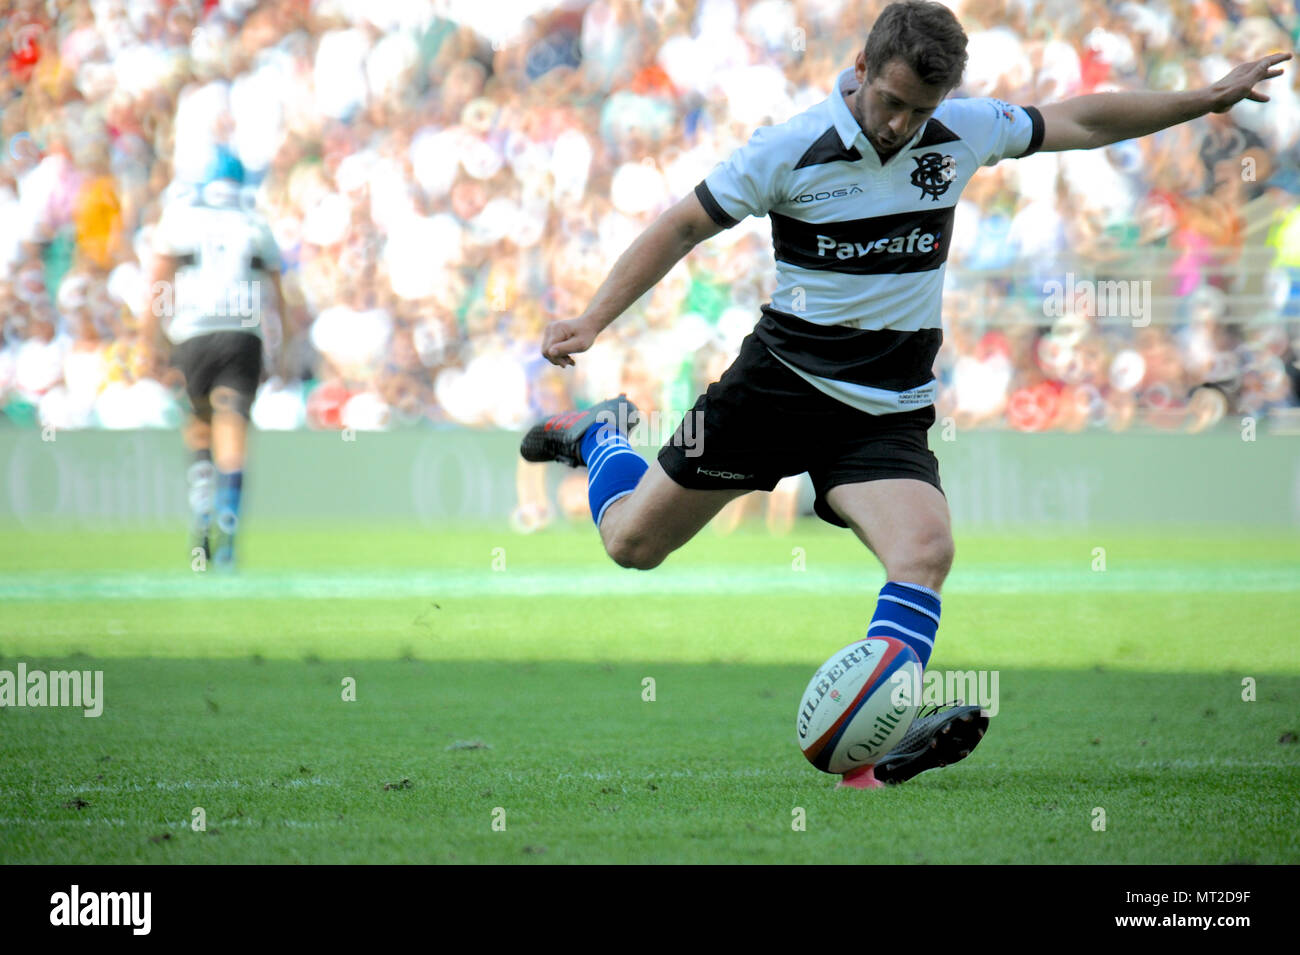 London, UK. 27th May 2018. Greg Laidlaw (Barbarians, Scrum Half) kicking the ball during the Barbarians V England Killik Cup match at Twickenham Stadium, London, UK.   The match was won by the Barbarian side in the end, 63-45.  While England is a national team, the Barbarians have no home ground or clubhouse. They’re a touring club that plays at the invitation of clubs or unions and have visited all parts of the home unions. Overseas, the club has played in 25 countries, most recently Tunisia, Spain, Georgia and Portugal, thus spreading the Barbarian tradition. Credit: Michael Preston/Alamy Li Stock Photo